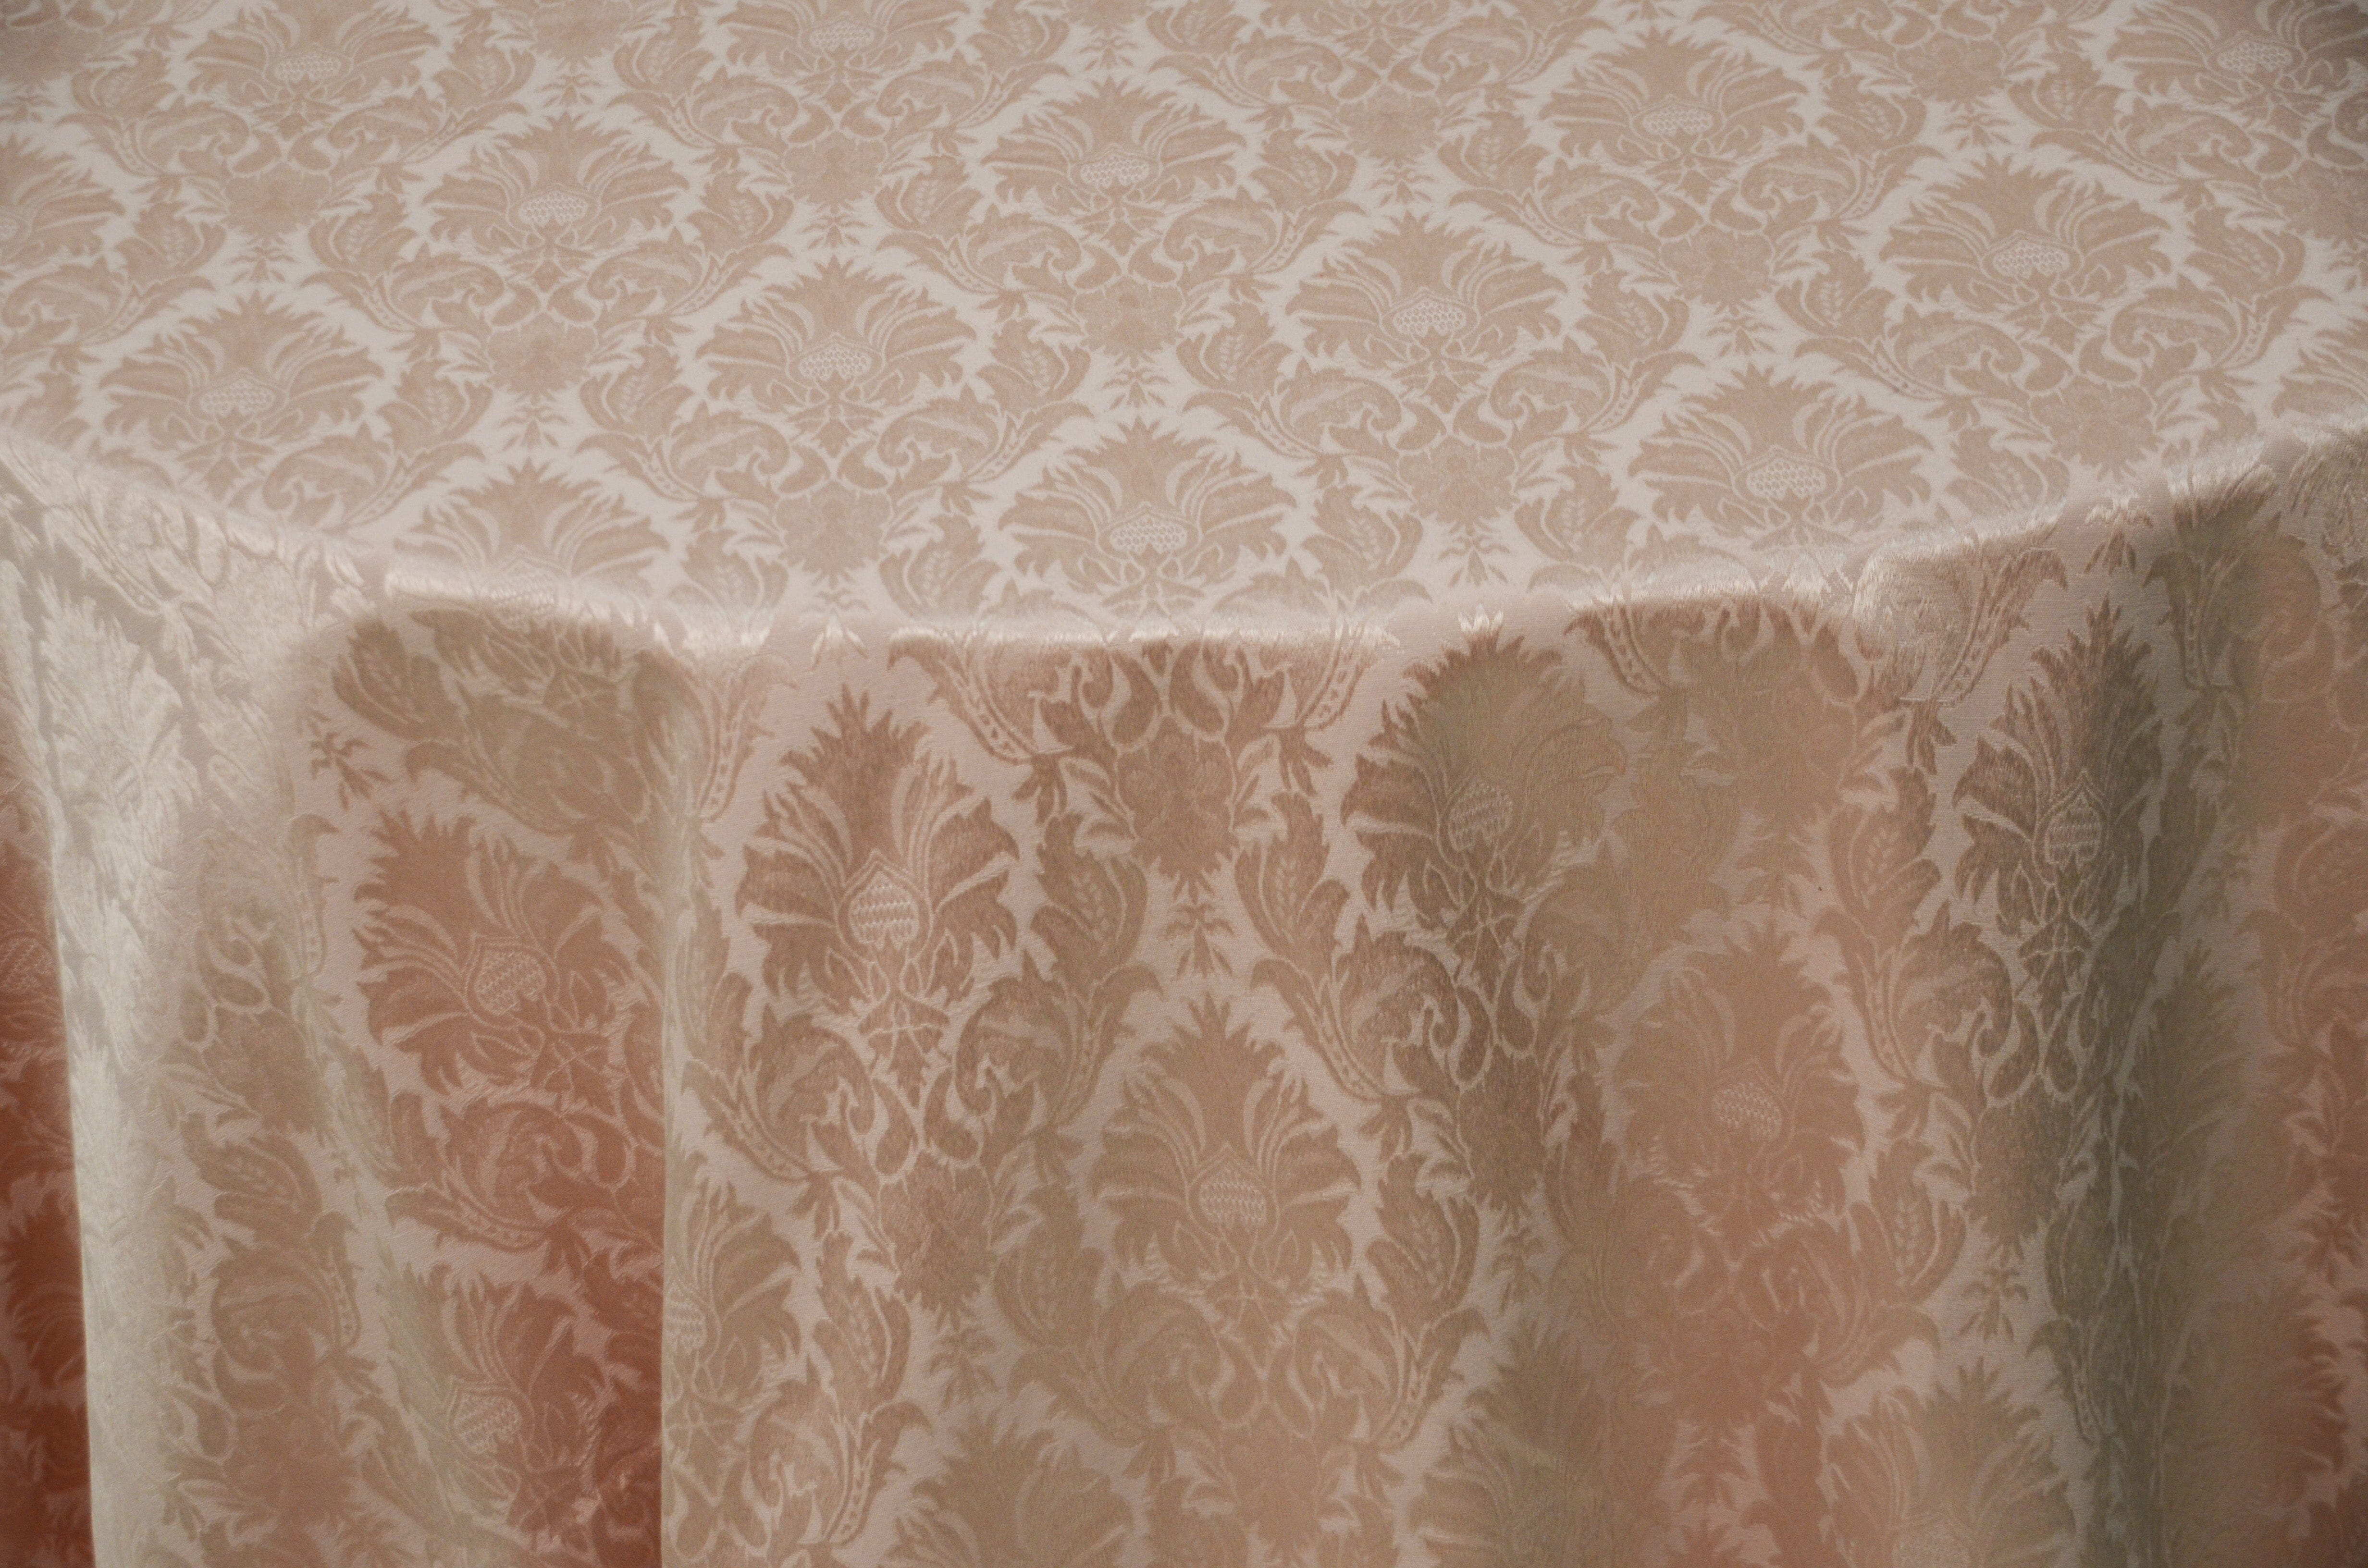 Vintage Damask Fabric | Damask Brocade Fabric | 58" Wide | Drapery, Curtains, Tablecloth, Costume | Multiple Colors | Fabric mytextilefabric Bolts Blush Pink 